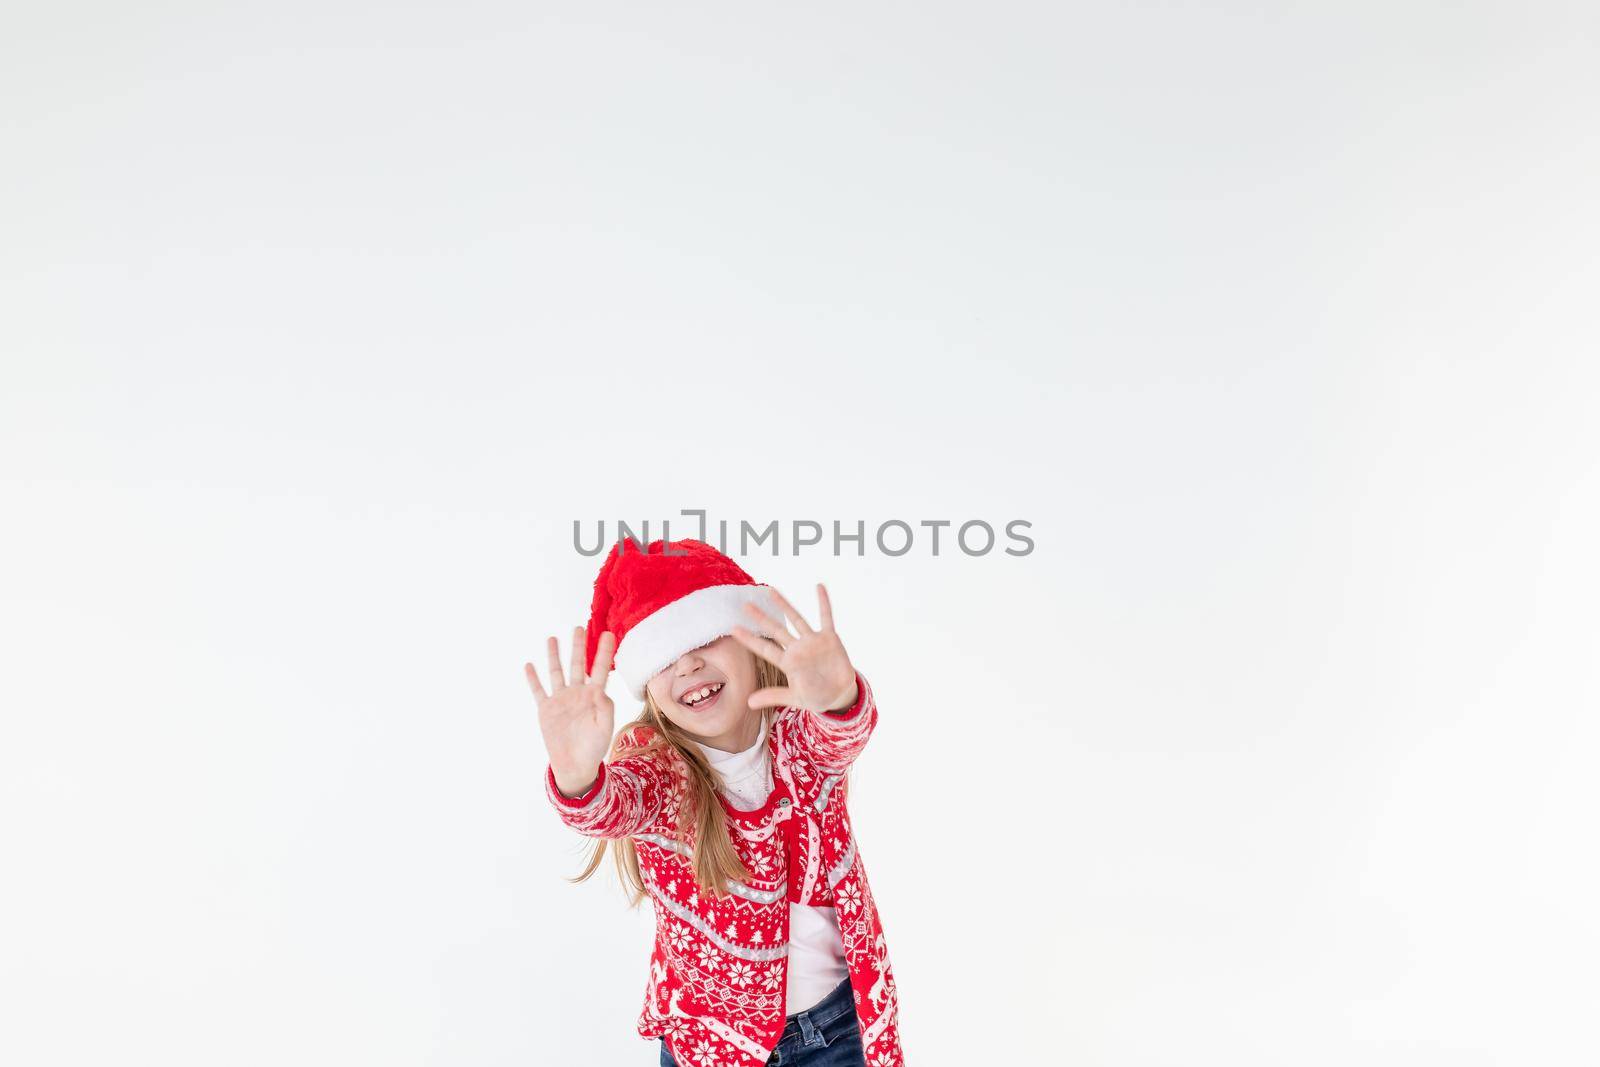 Photo portrait of kid dancing keeping hands up over head wearing red christmas sweater isolated on blue color background